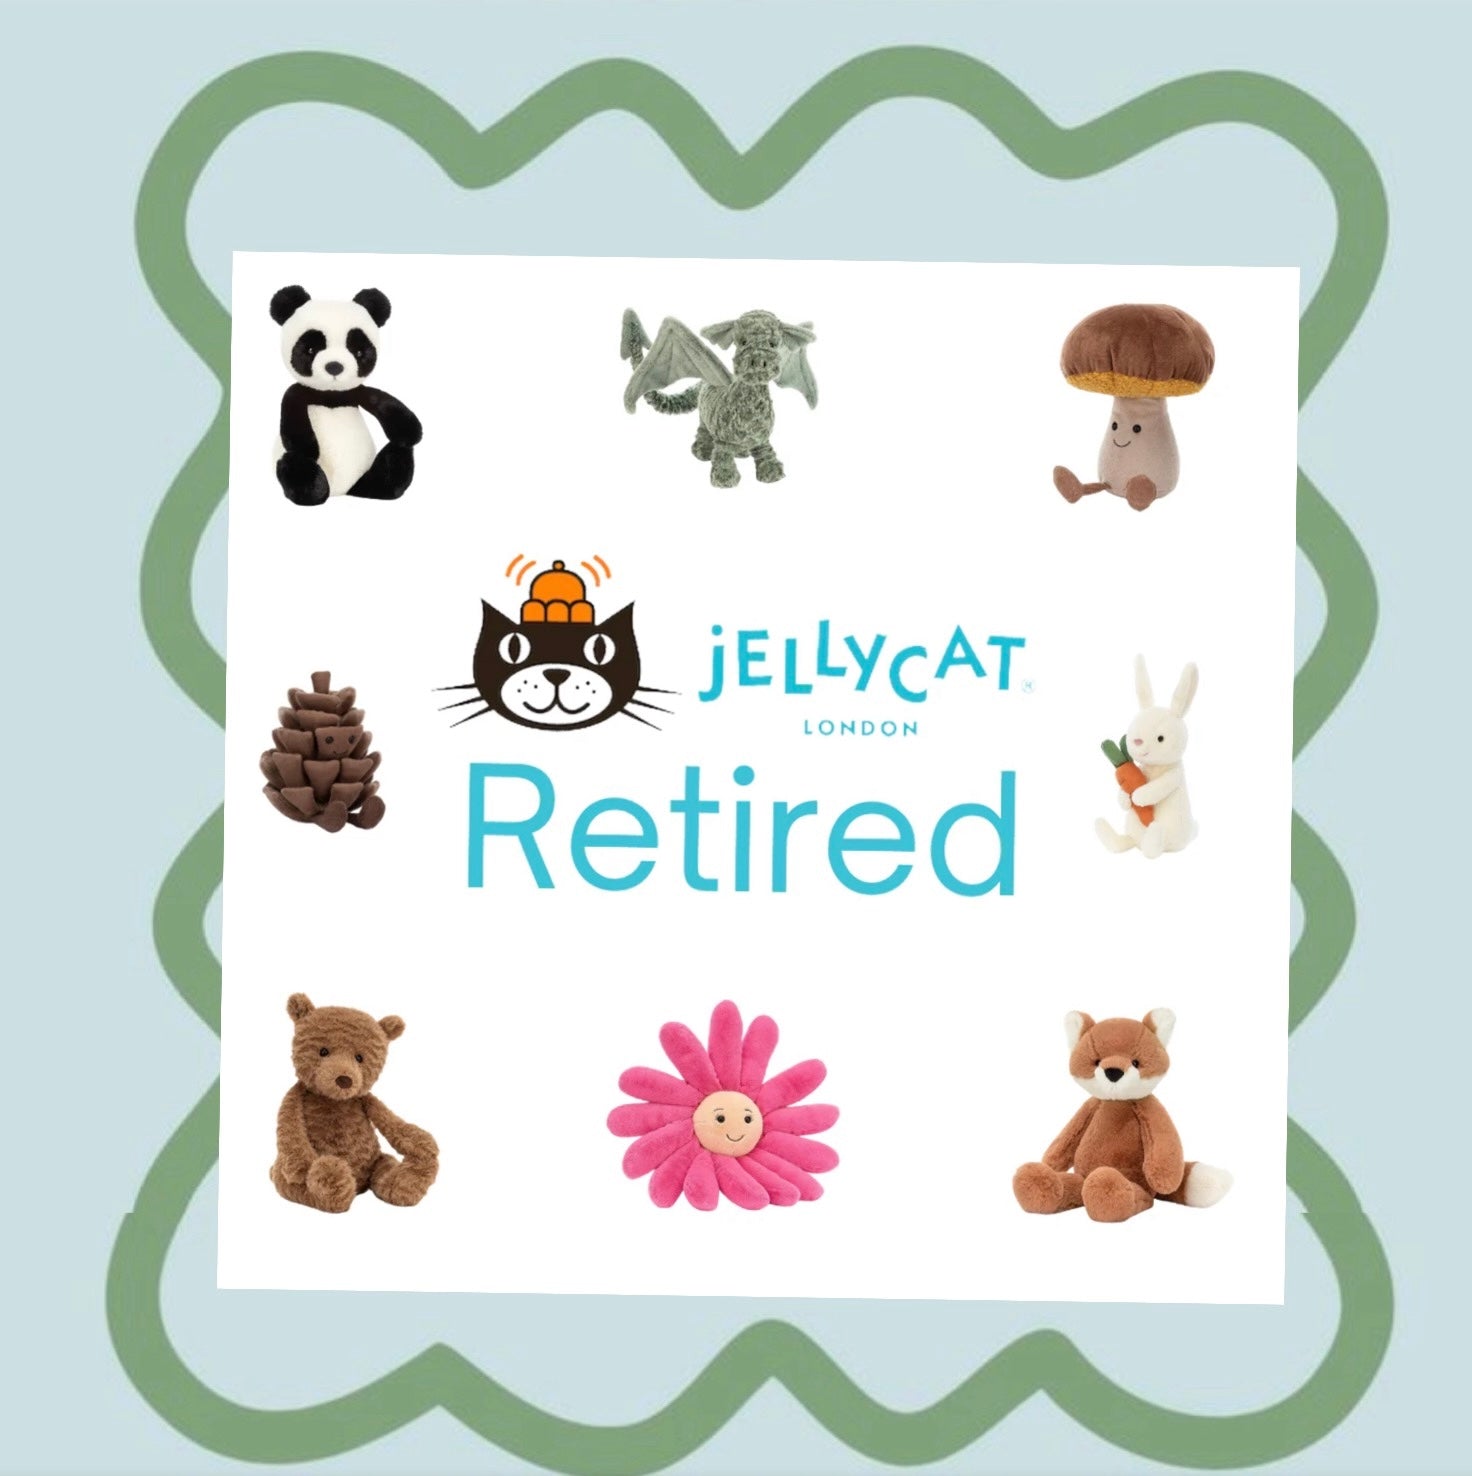 Last Chance JELLYCAT - Meet old friends, no longer being produced but we couldn't quite bring ourselves to say goodbye.